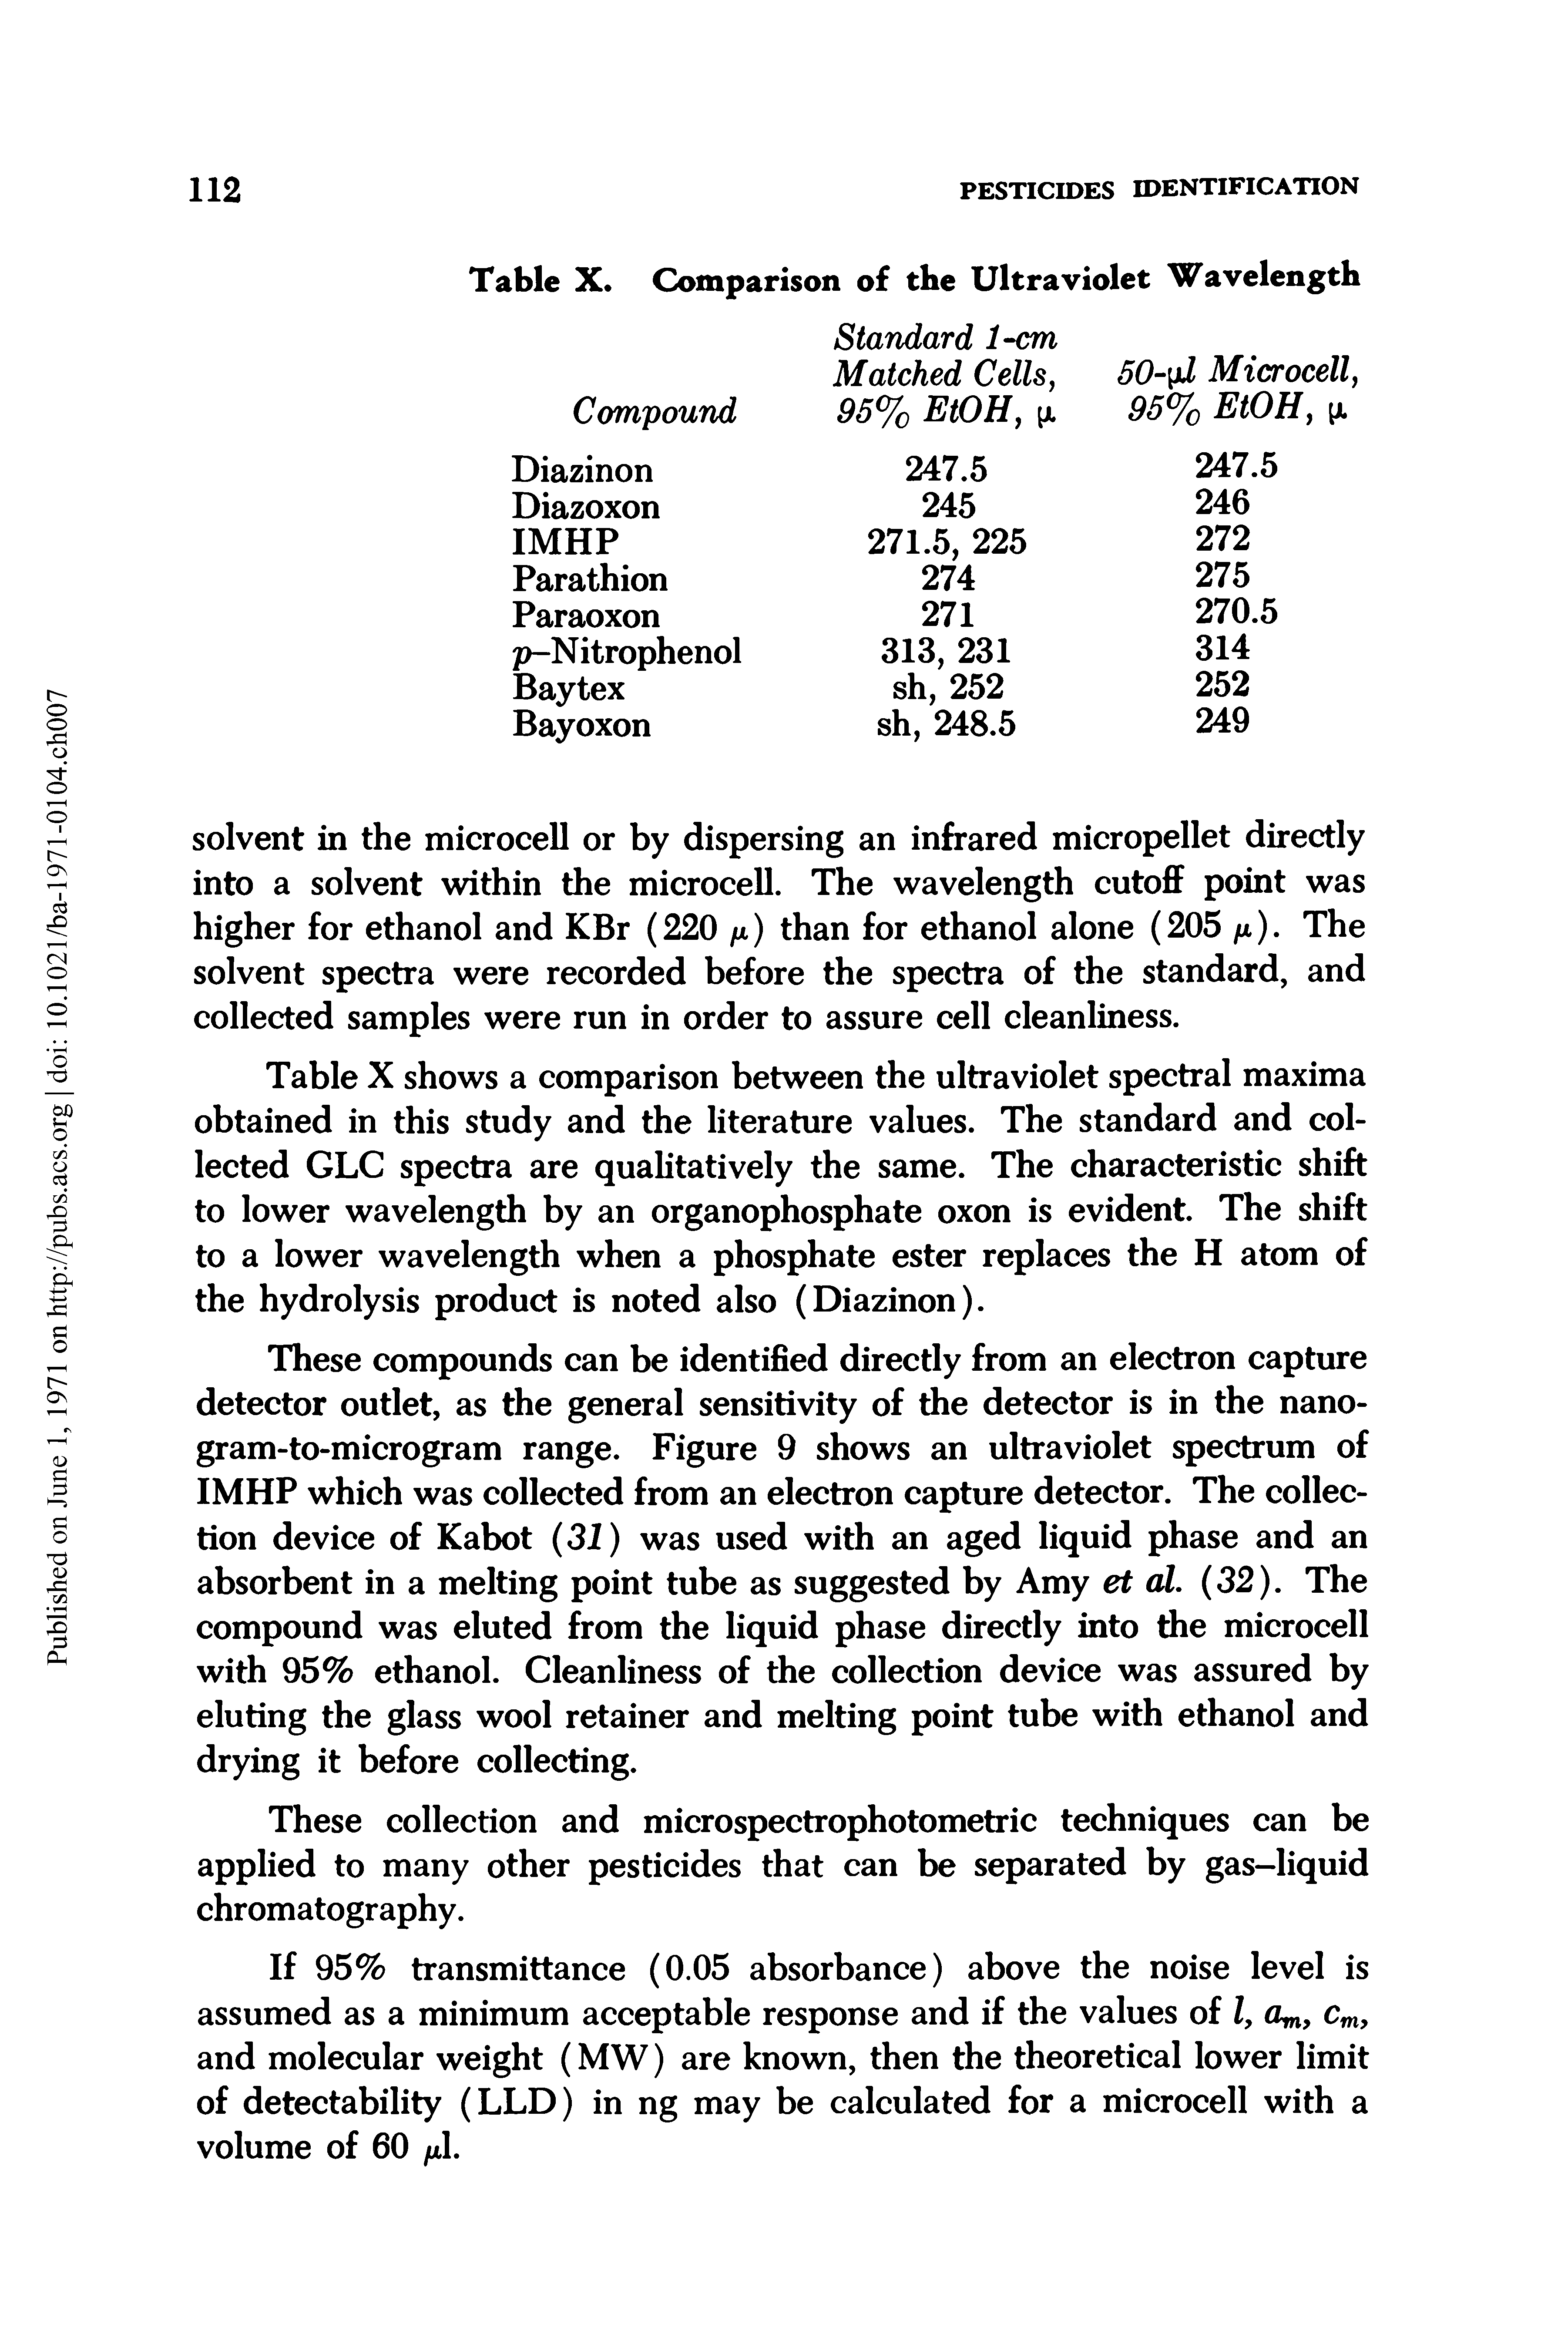 Table X shows a comparison between the ultraviolet spectral maxima obtained in this study and the literature values. The standard and collected GLC spectra are qualitatively the same. The characteristic shift to lower wavelength by an organophosphate oxon is evident. The shift to a lower wavelength when a phosphate ester replaces the H atom of the hydrolysis product is noted also (Diazinon).